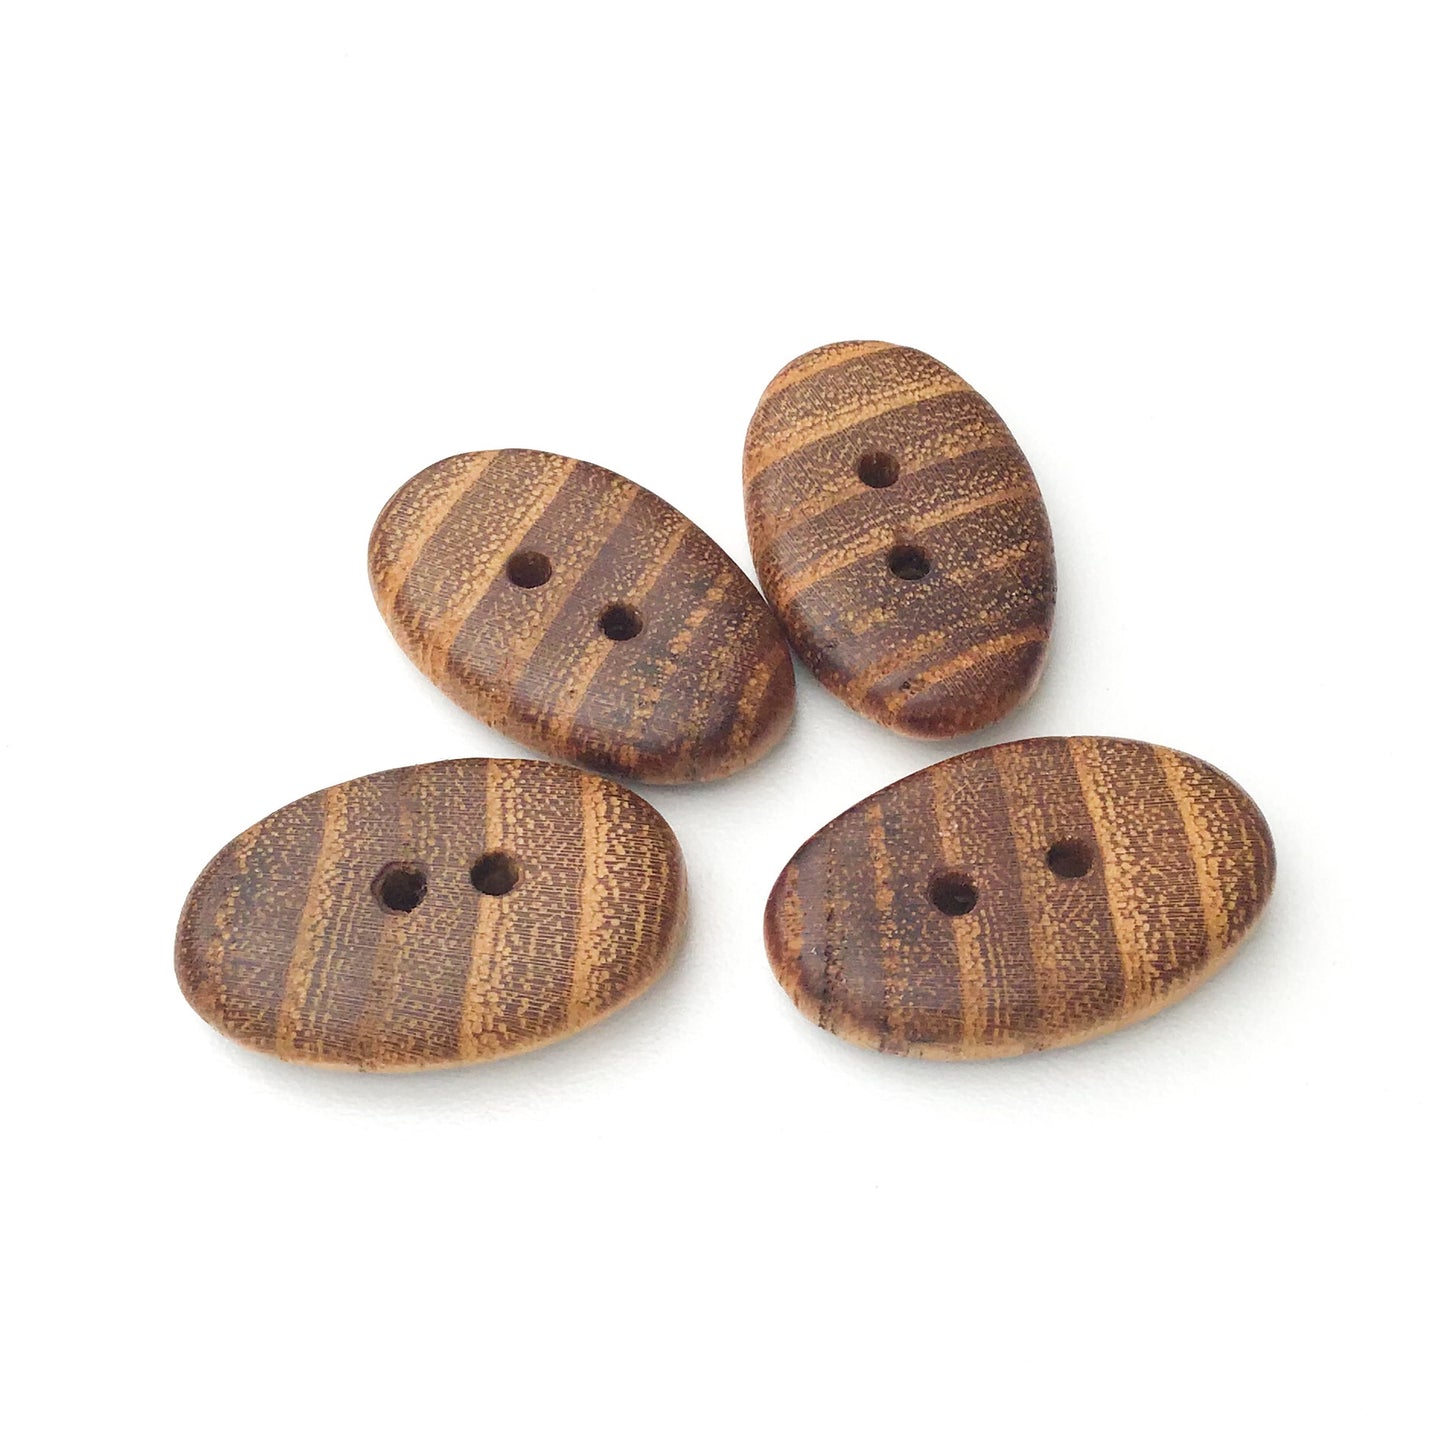 Black Locust Wood Buttons - Wooden Toggle Buttons - 3/4" X 1 3/16" - 4 Pack